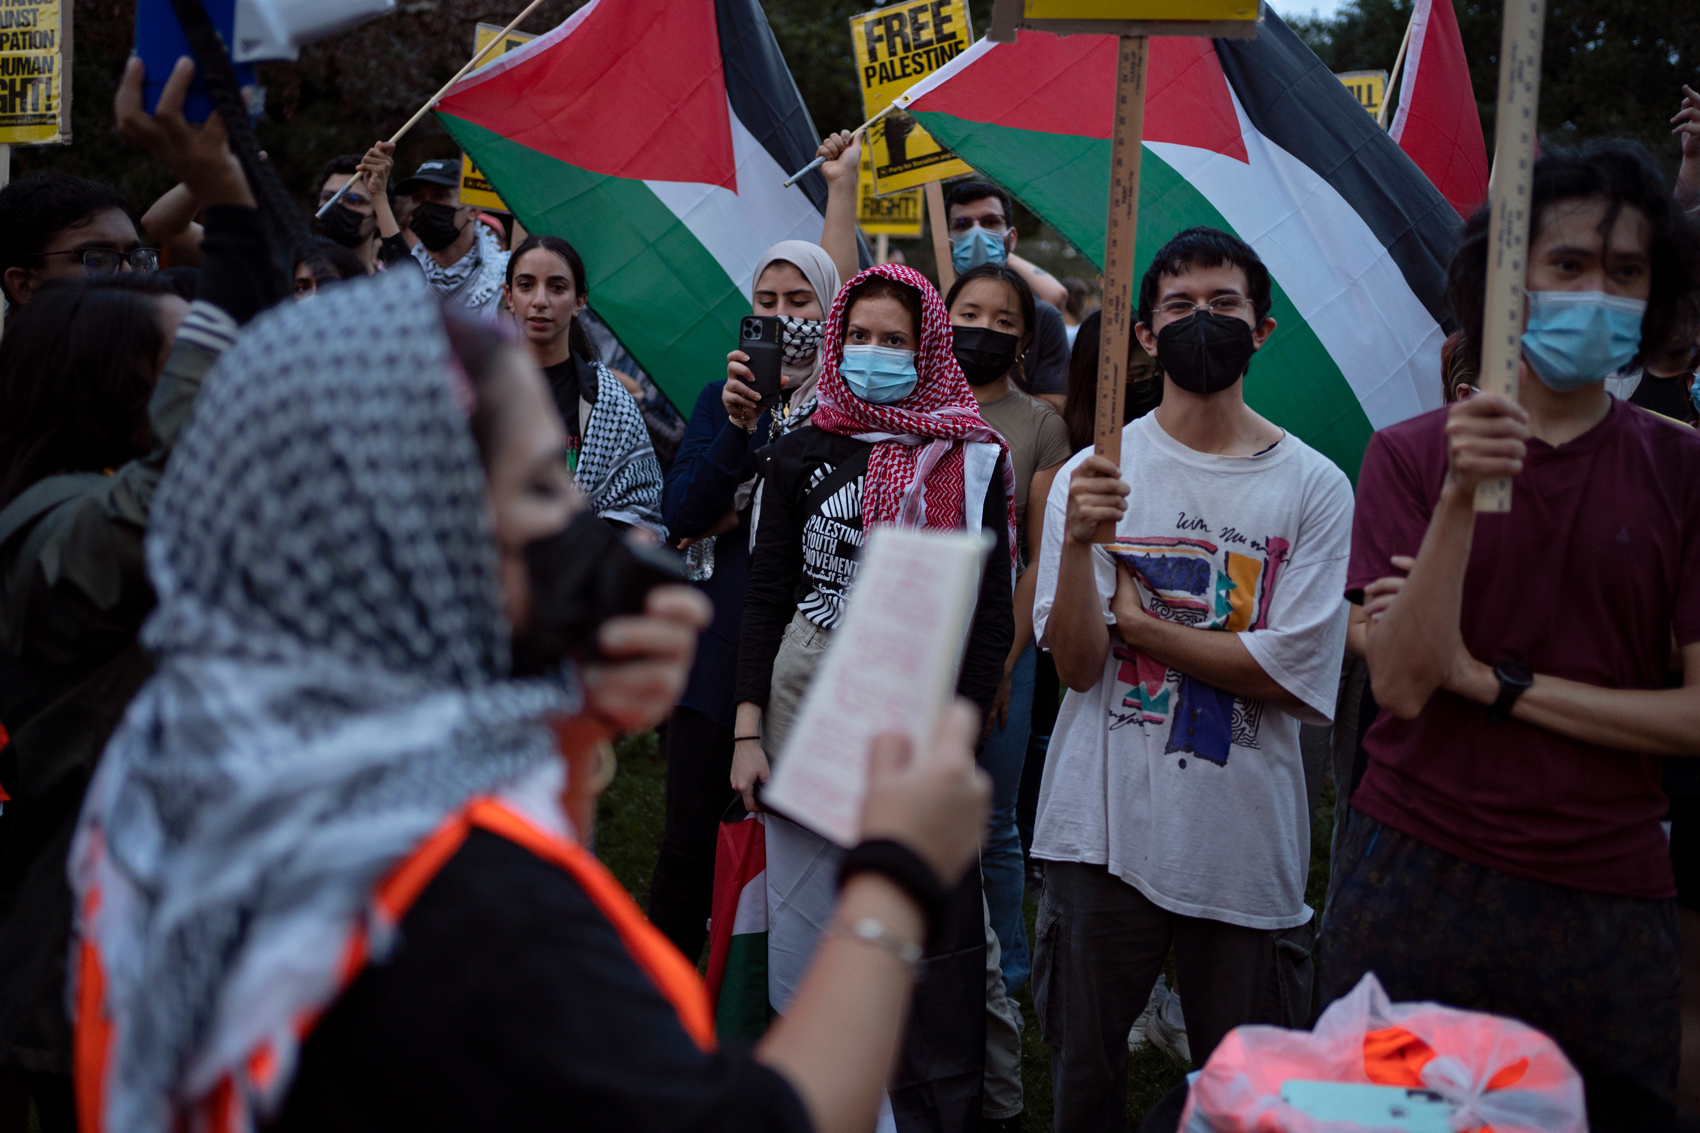 On October 27, 2023, people gather at a protest for Palestine and against Rice University’s Baker Institute’s anniversary gala, attended by former U.S. Secretaries of State Henry Kissinger and Hillary Rodham Clinton, in Houston, Texas. 